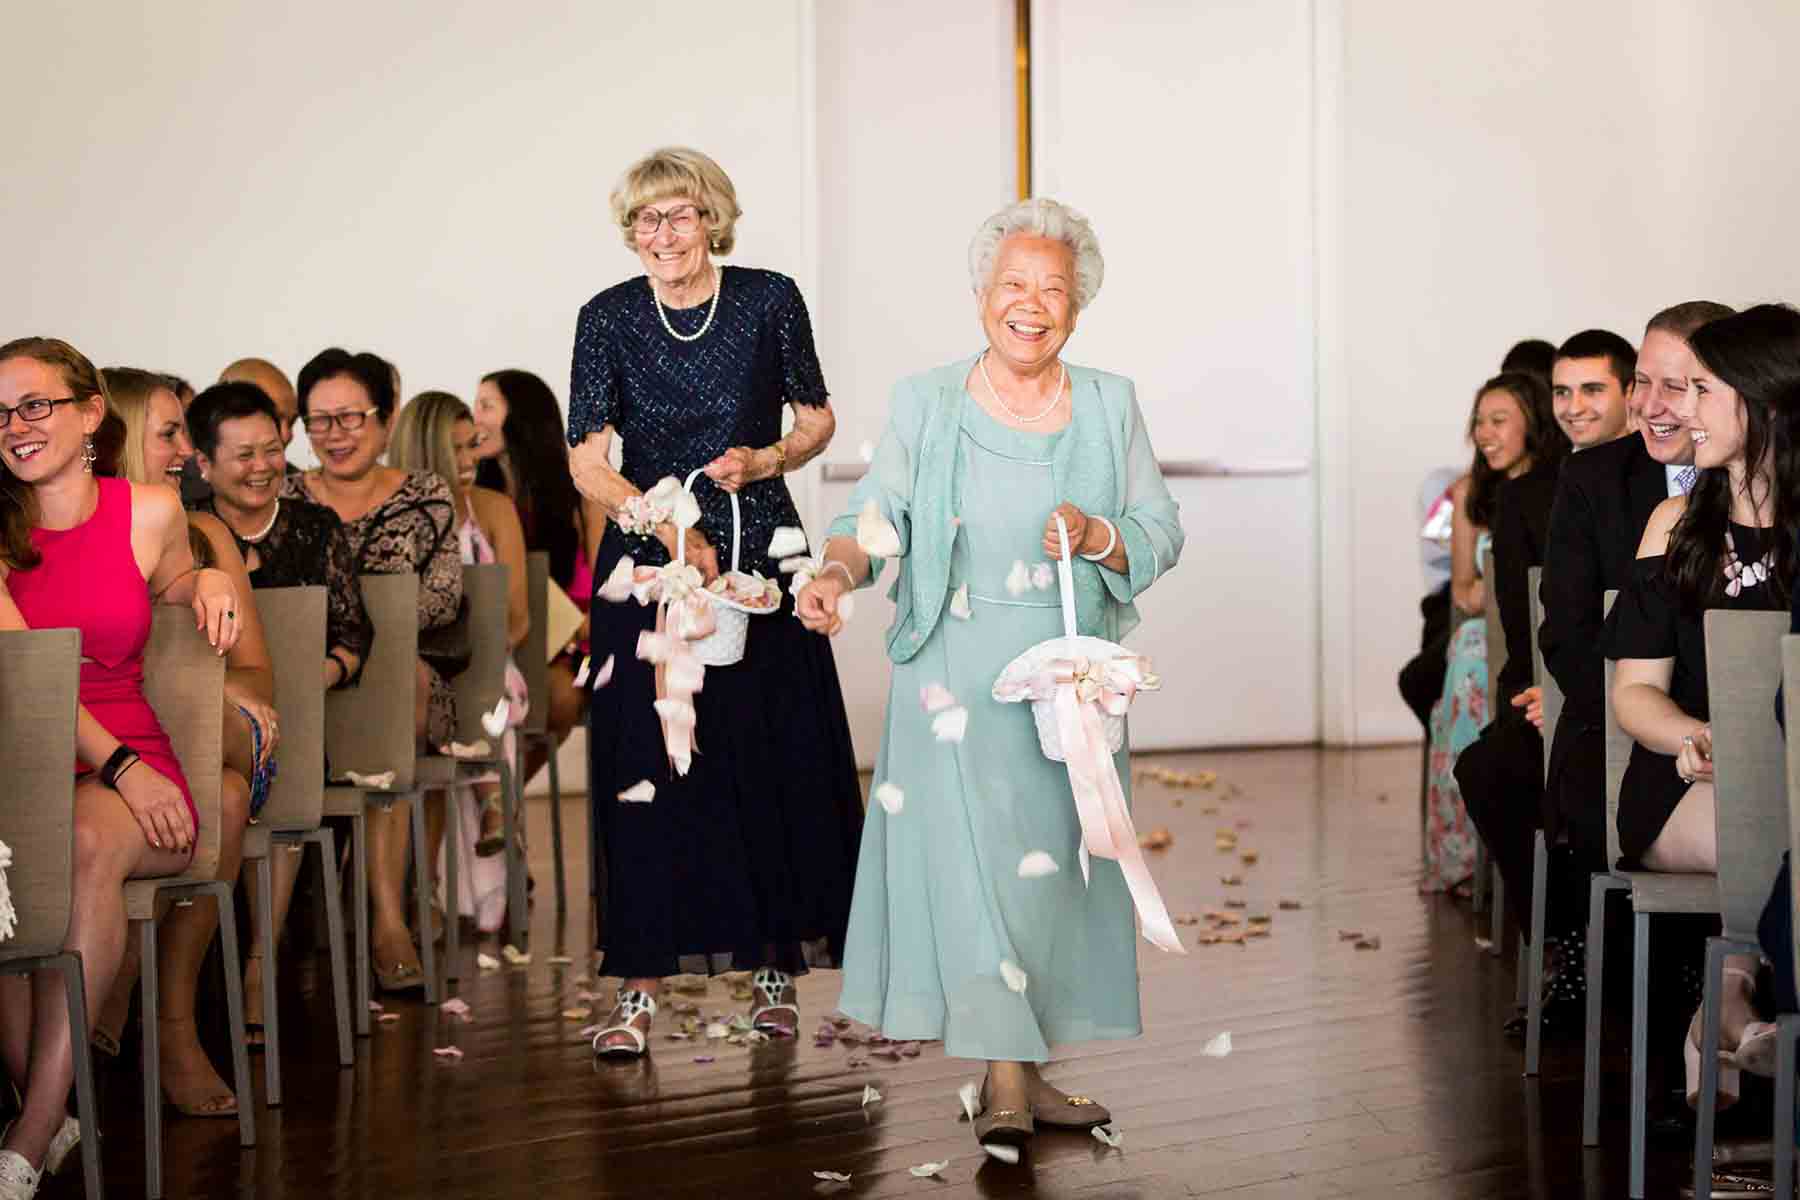 Two grandmothers throwing rose petals during ceremony for an article on the best wedding jobs for family and friends